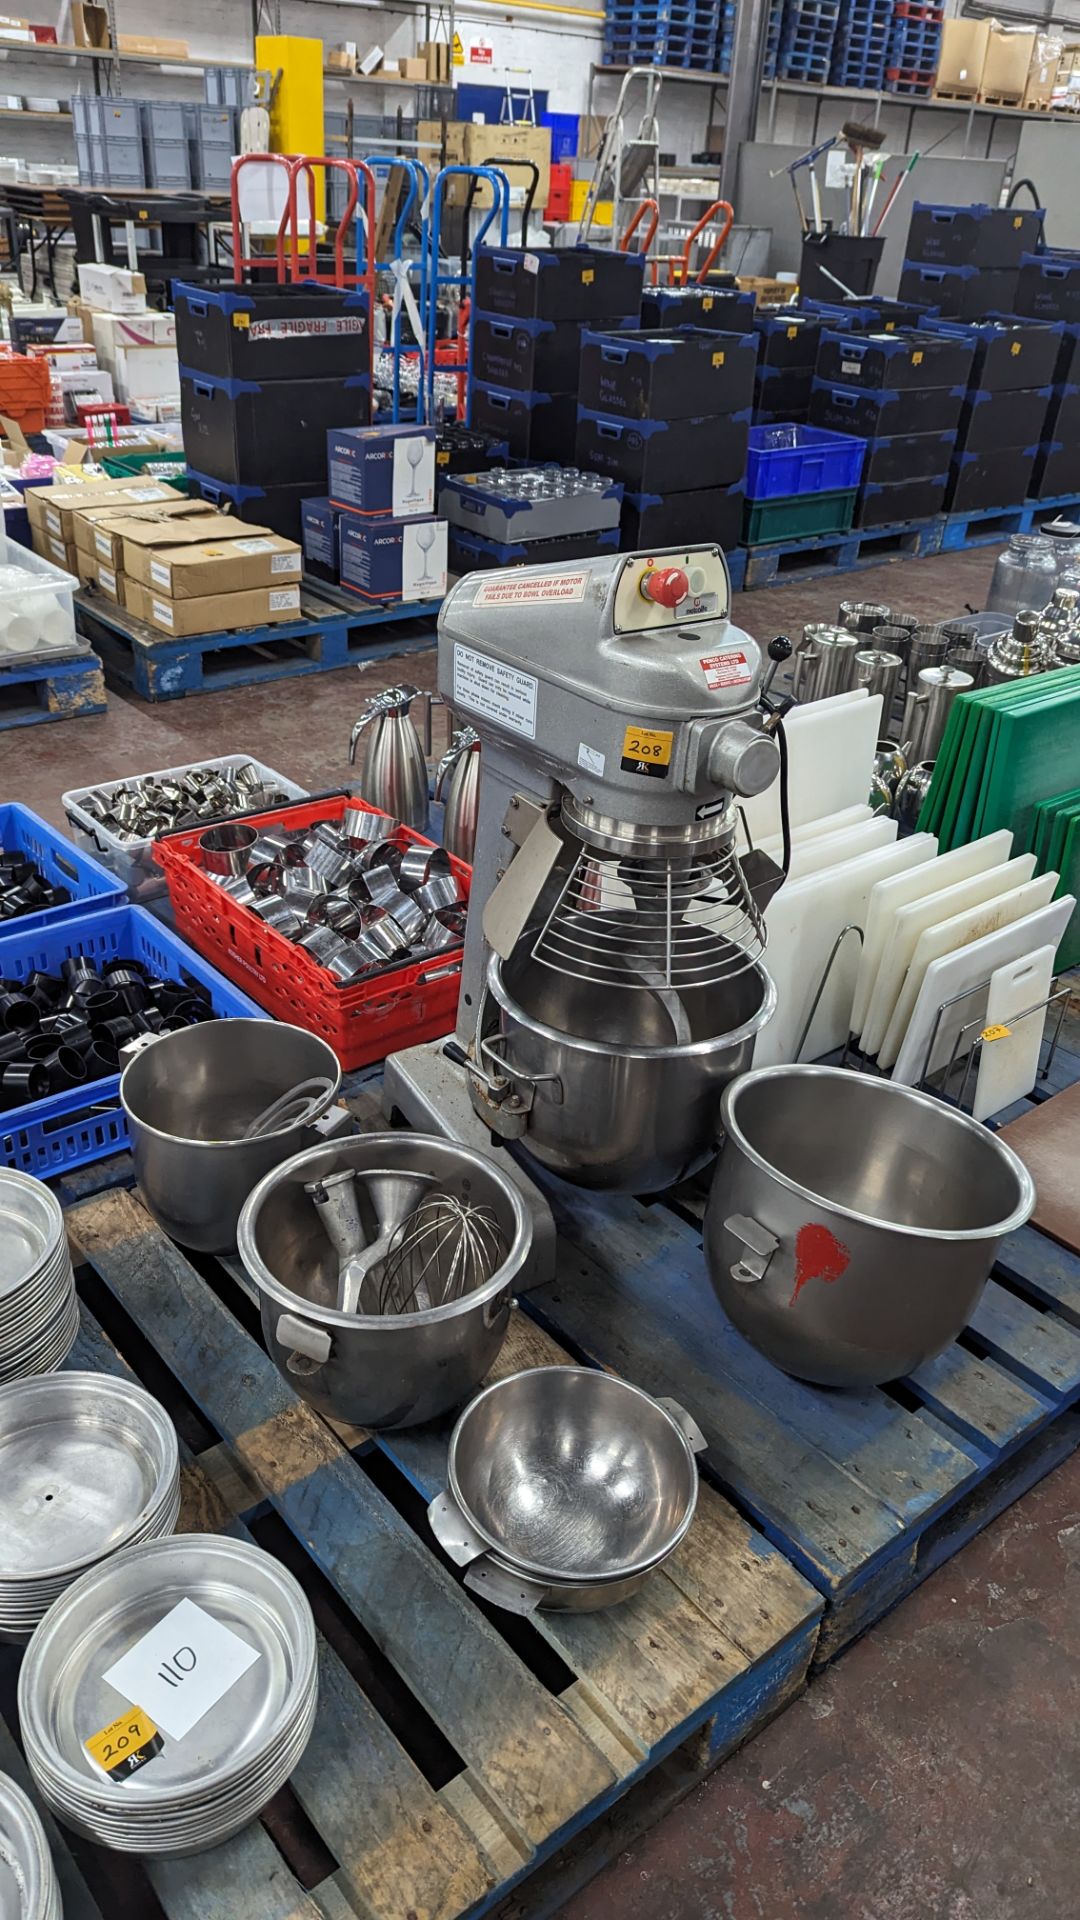 Metcalfe heavy duty commercial food mixer including quantity of bowls, blades, paddles & similar - Image 11 of 11